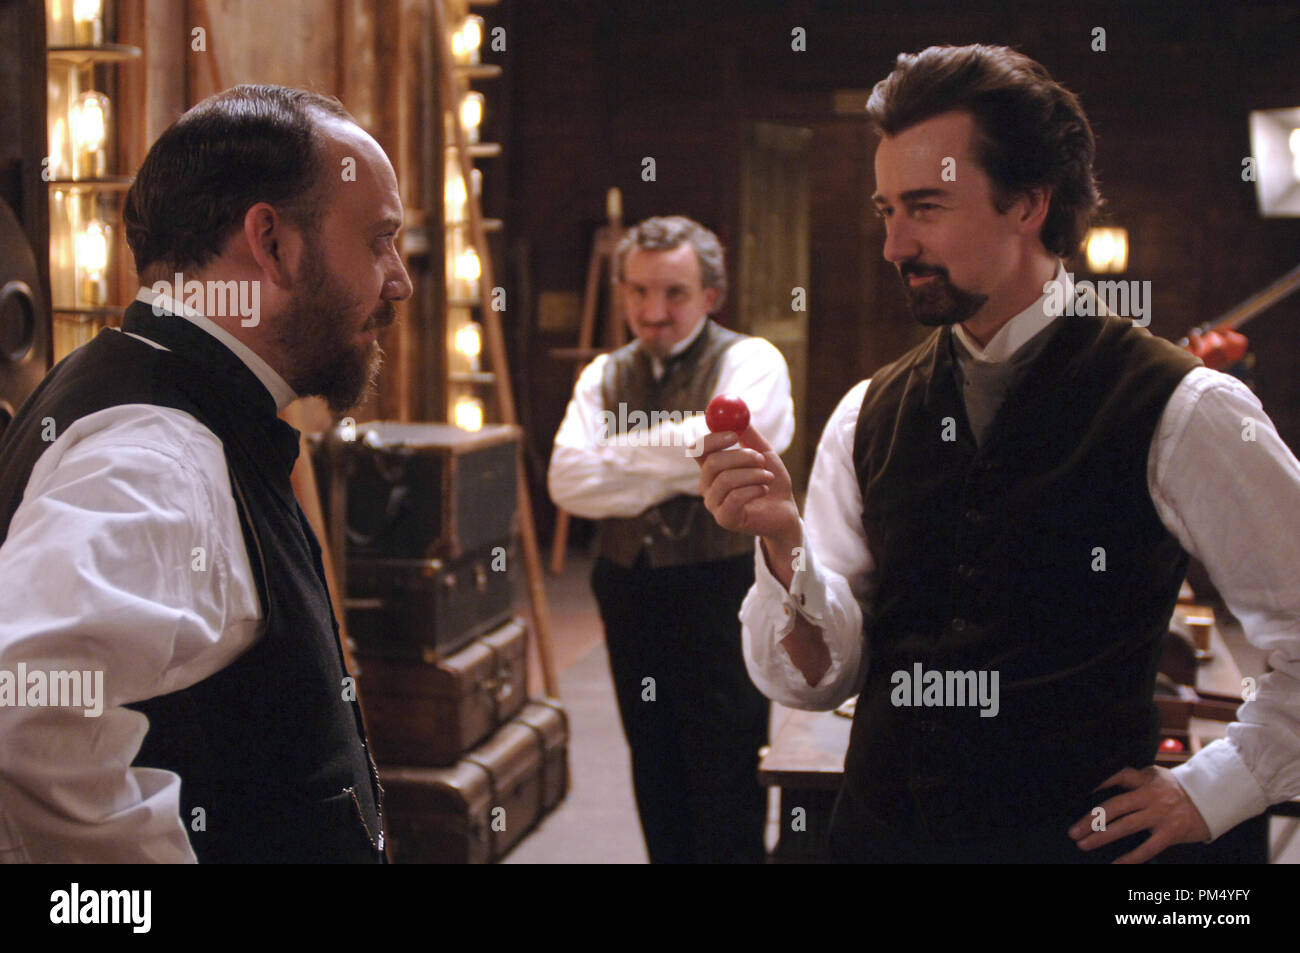 Film Still / Publicity Still from 'The Illusionist' Paul Giamatti, Edward Norton © 2006 Yari Film Group Photo Credit: Glen Wilson   File Reference # 30737419THA  For Editorial Use Only -  All Rights Reserved Stock Photo